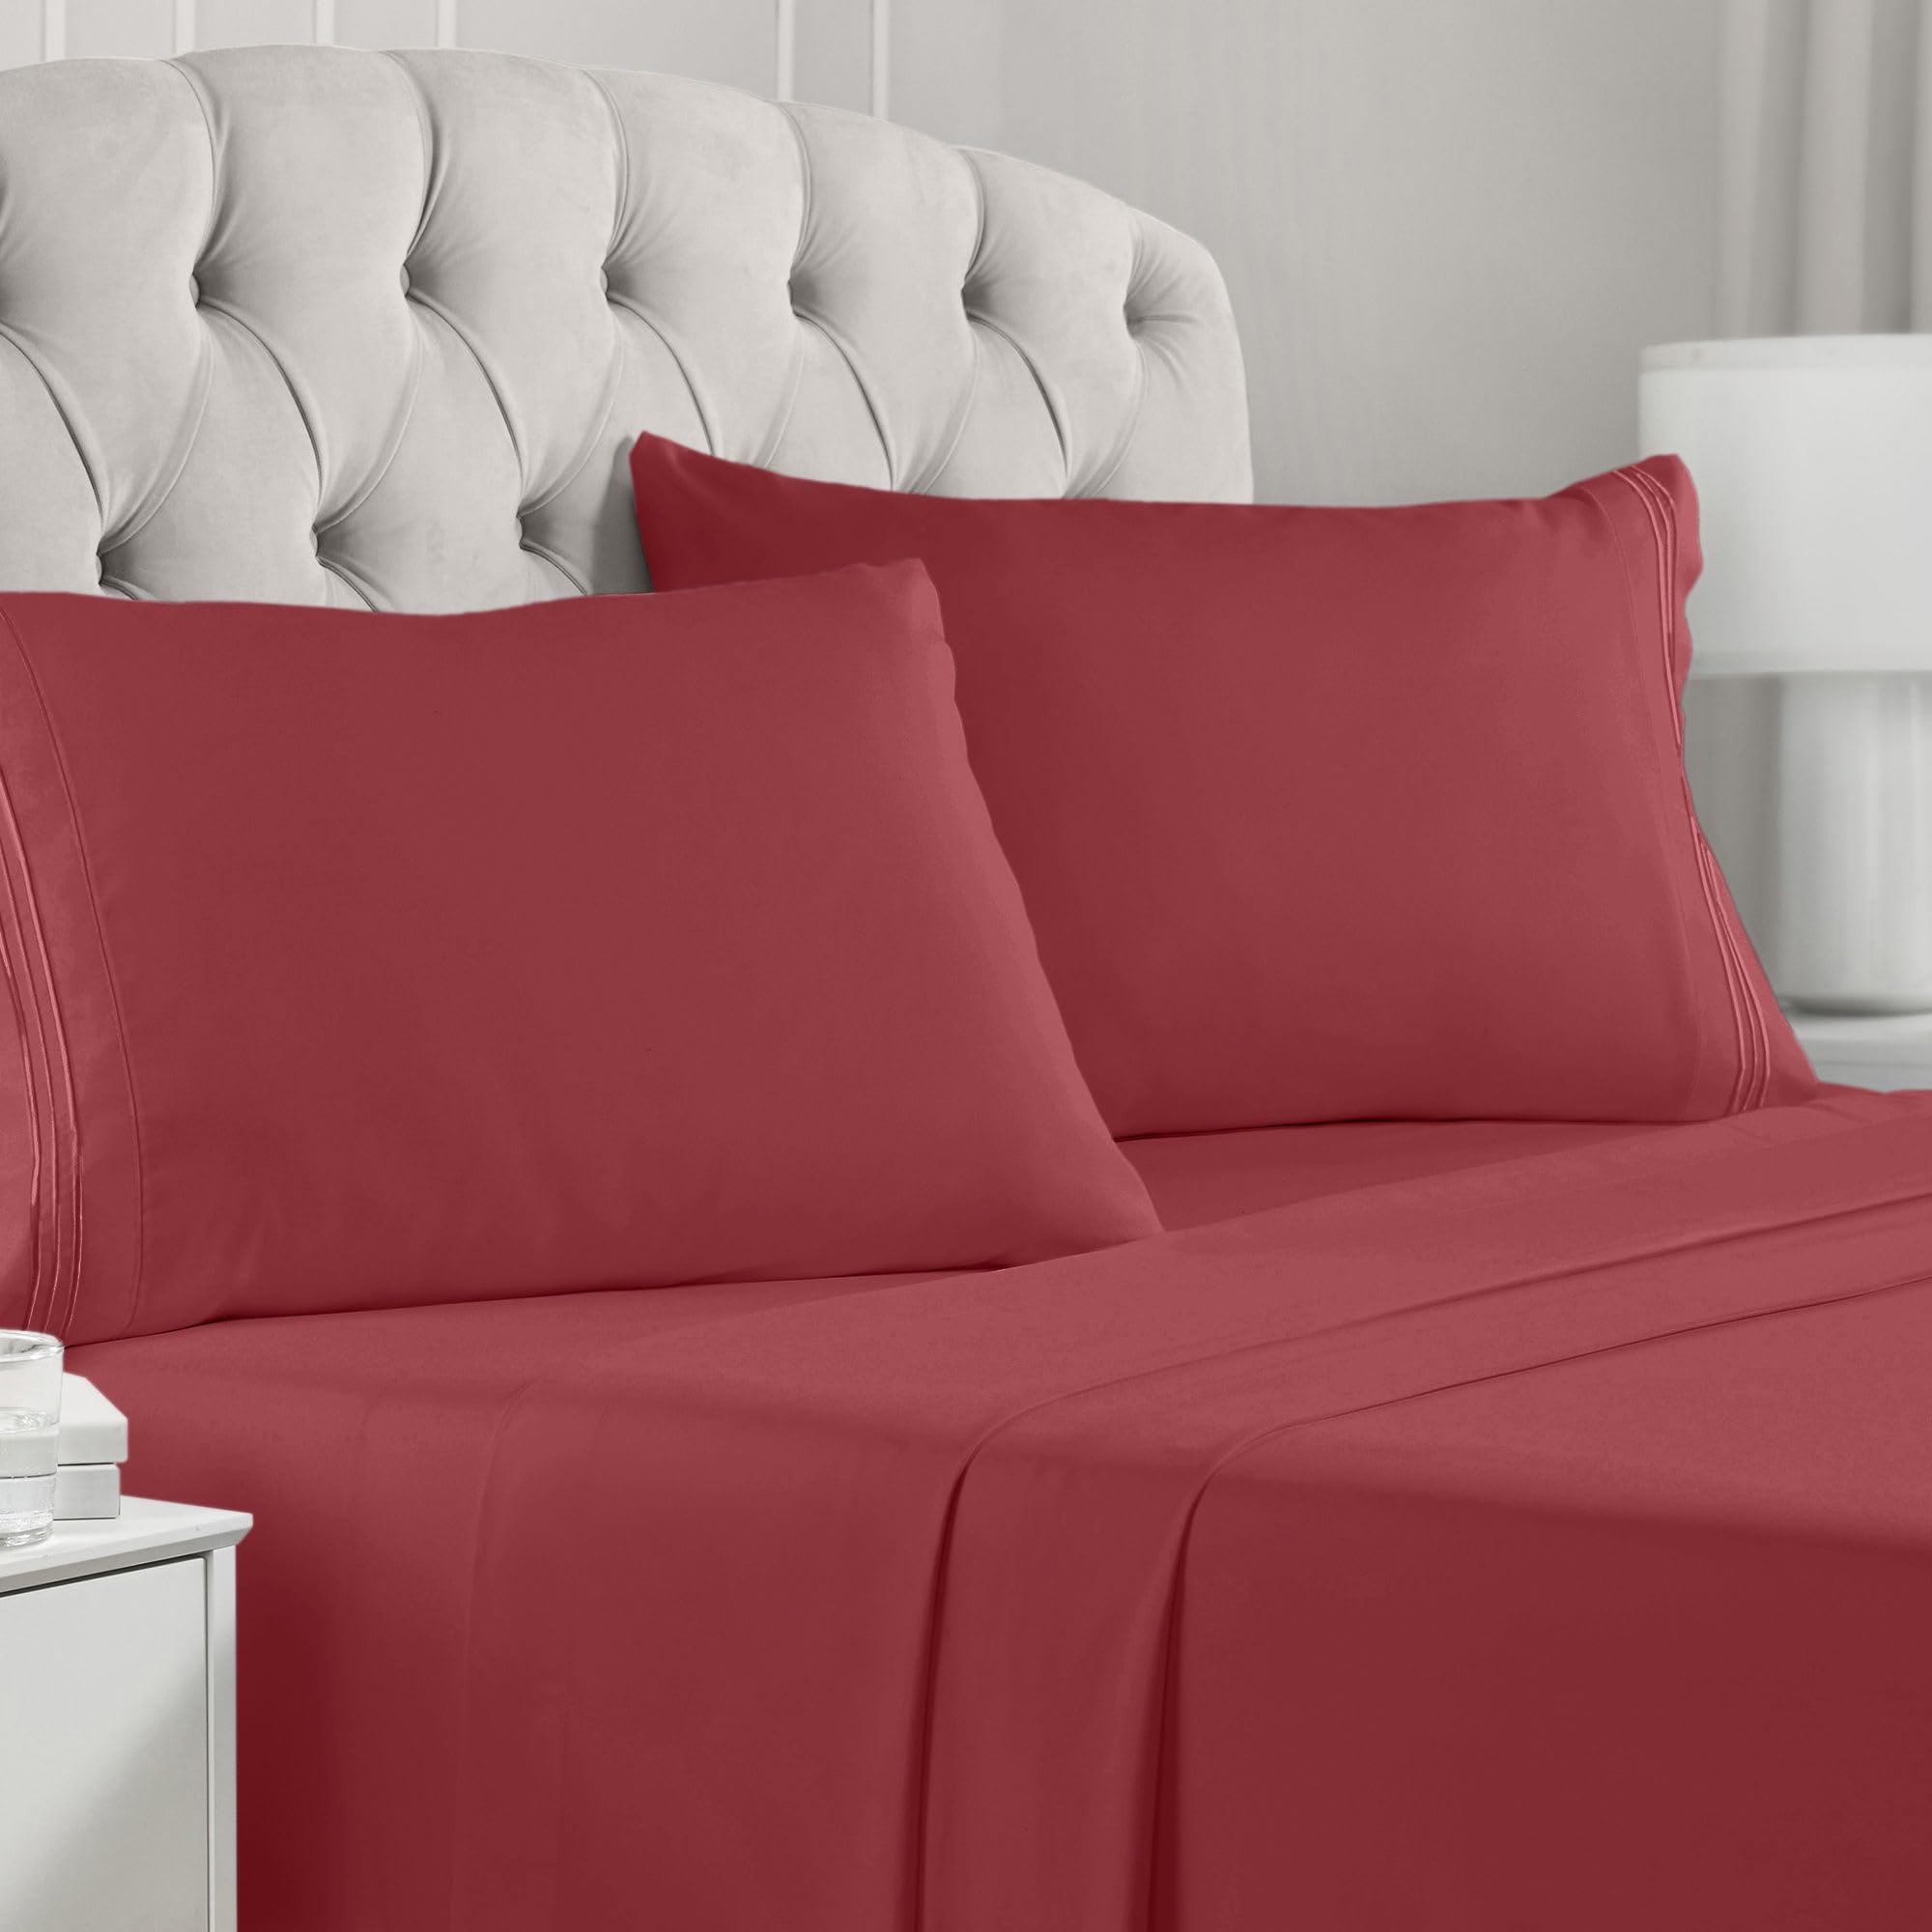 Book Cover Mellanni California King Sheet Set - 4 Piece Iconic Collection Bedding Sheets & Pillowcases - Hotel Luxury, Extra Soft, Cooling Bed Sheets - Deep Pocket up to 16 inch - Easy Care (Cal King, Burgundy) California King Burgundy